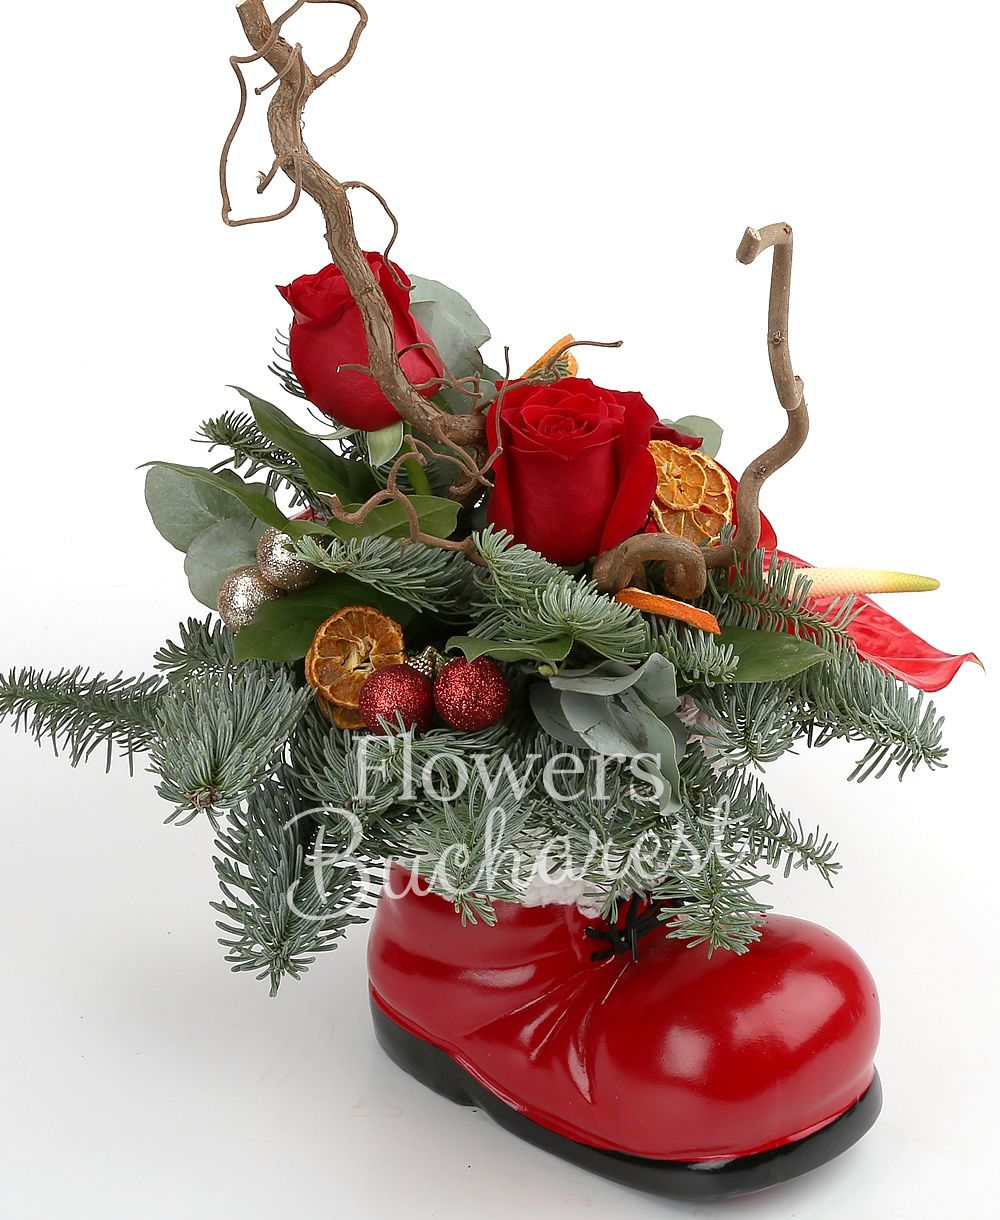 3 red roses, 2 red anthurium, corylus, dried orange slices, globes, greenery